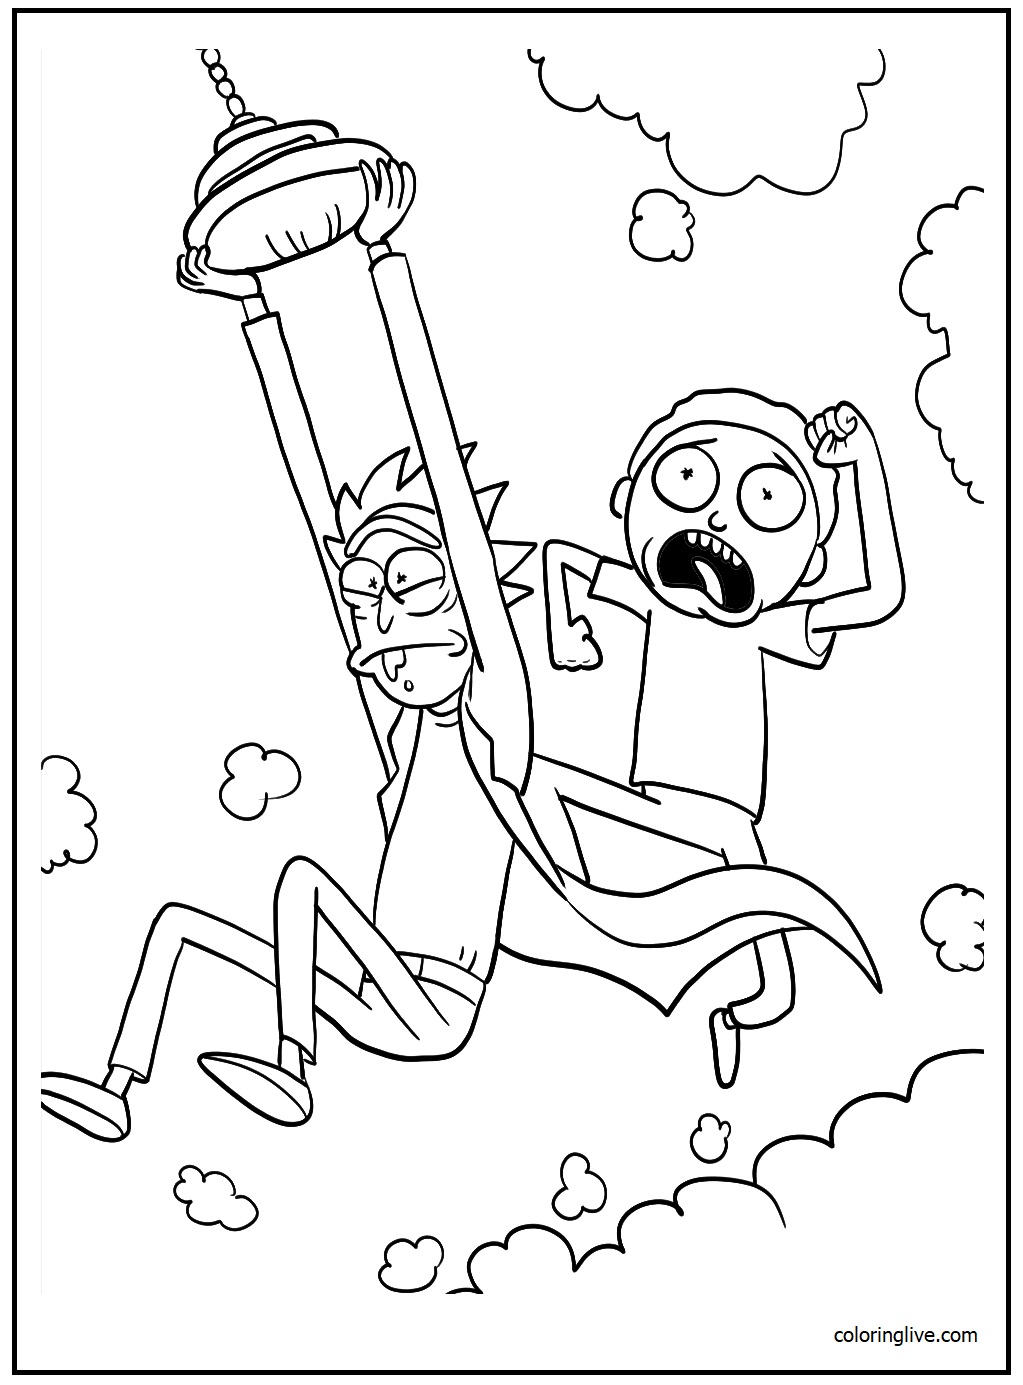 Printable Rick and Morty flying Coloring Page for kids.